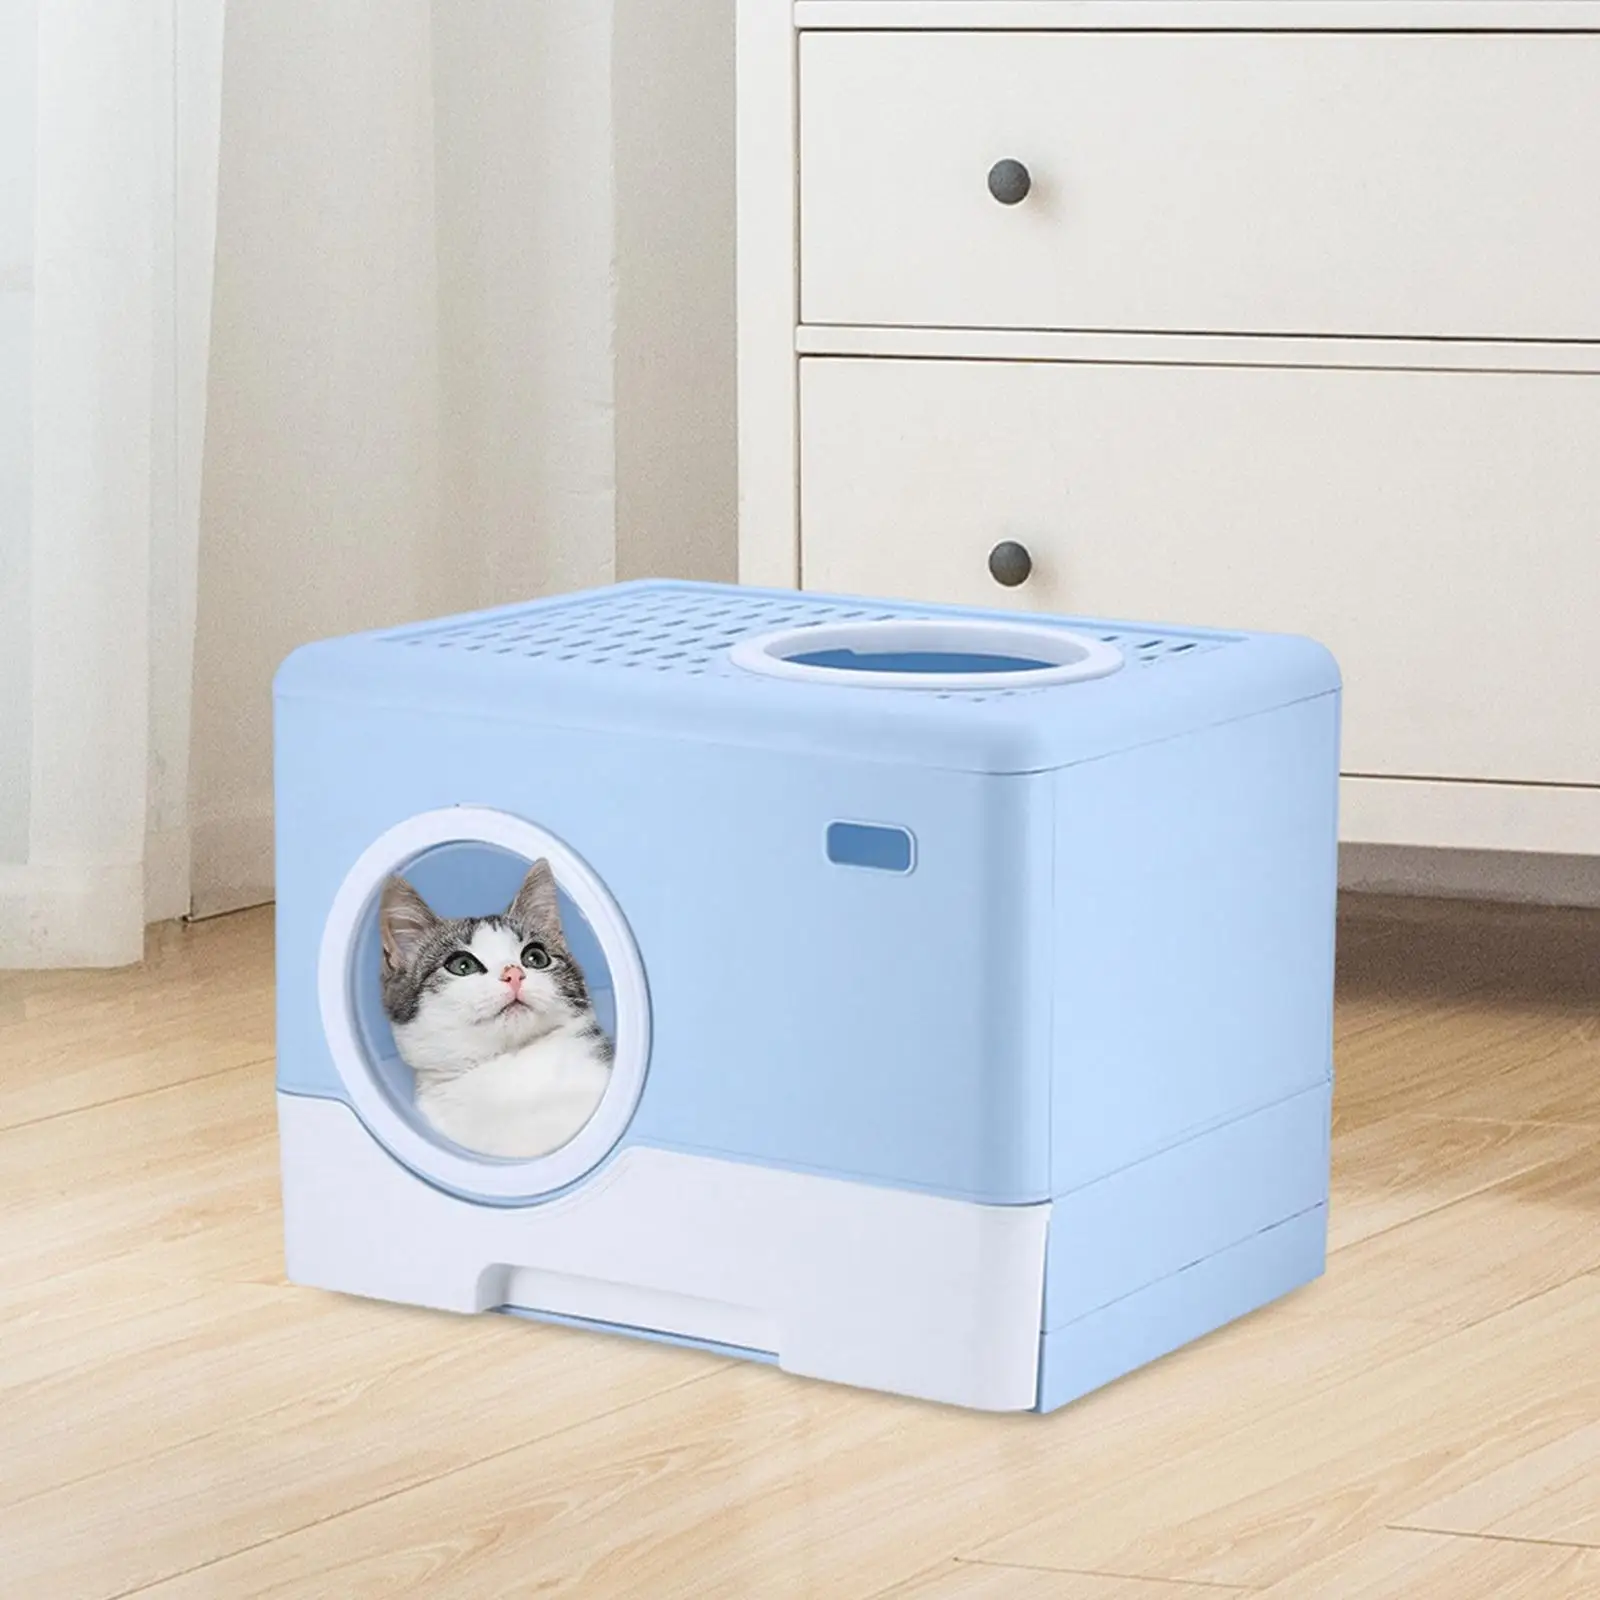 Pet Cat Litter Box Toilet Enclosed Kitten Litter Box for Indoor Portable Large Space Easy Clean Drawer Type Potty Accessories